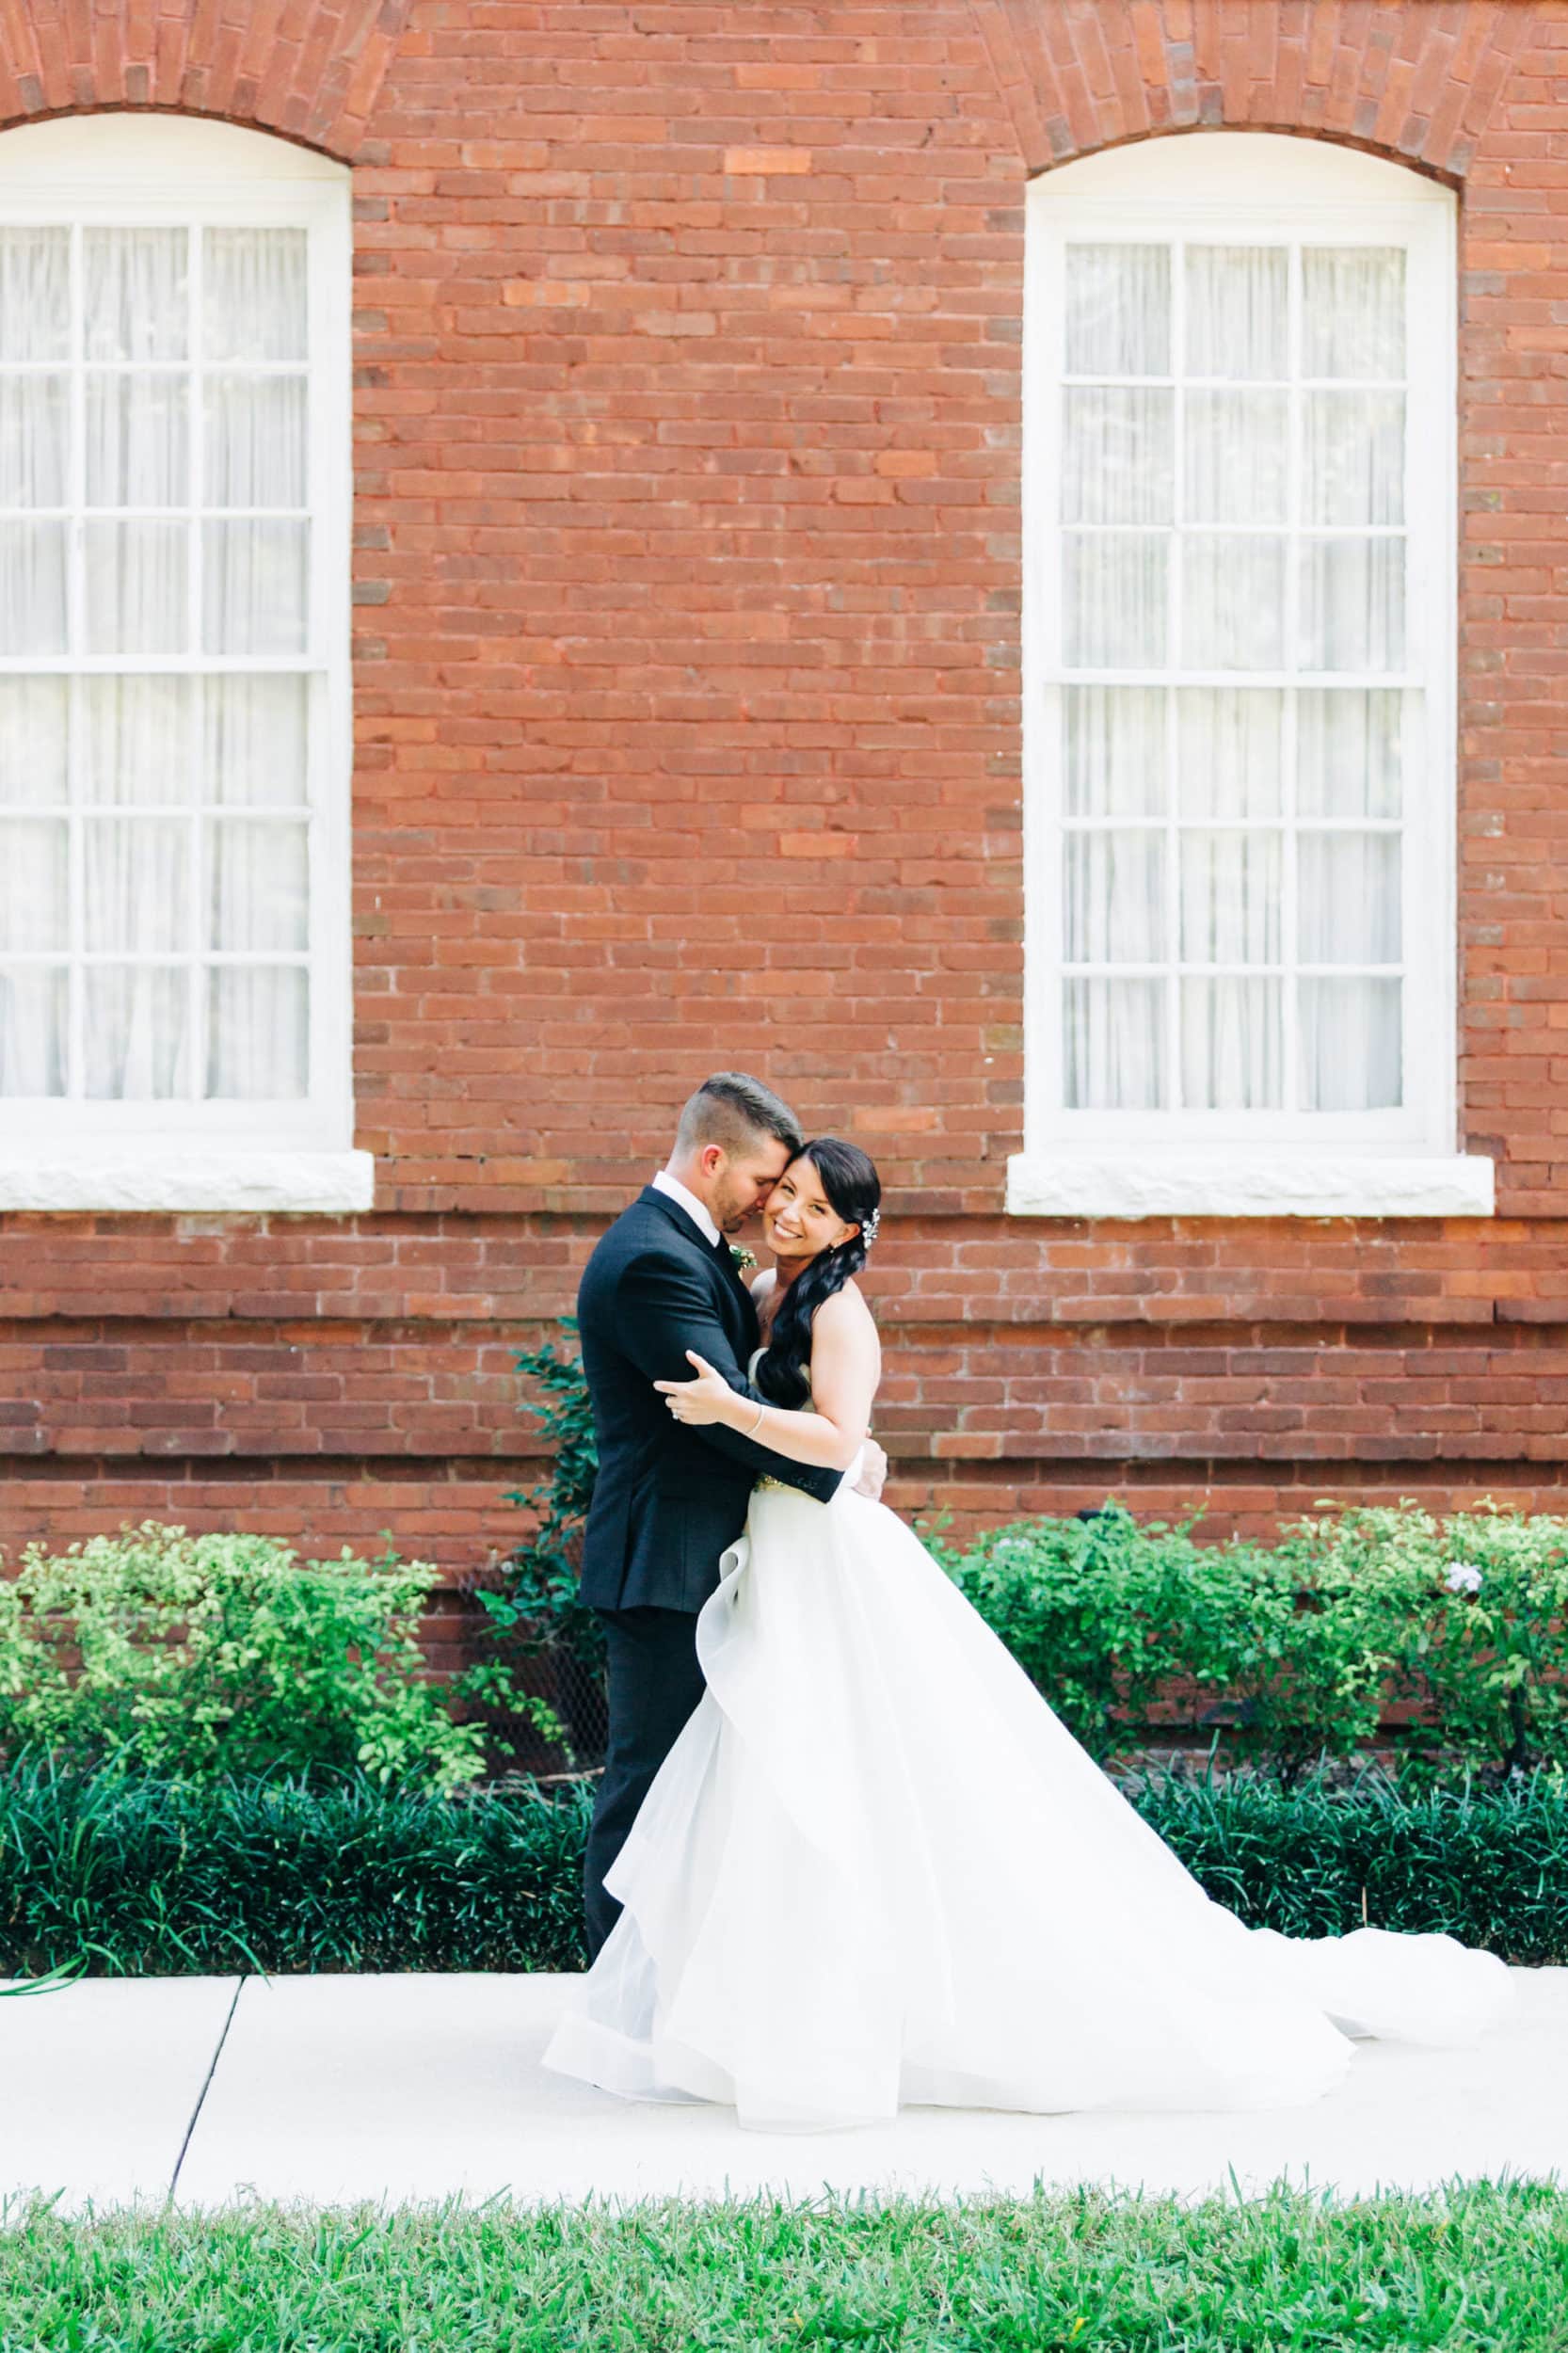 groom holding bride intimately between white windows in front of red brick walls